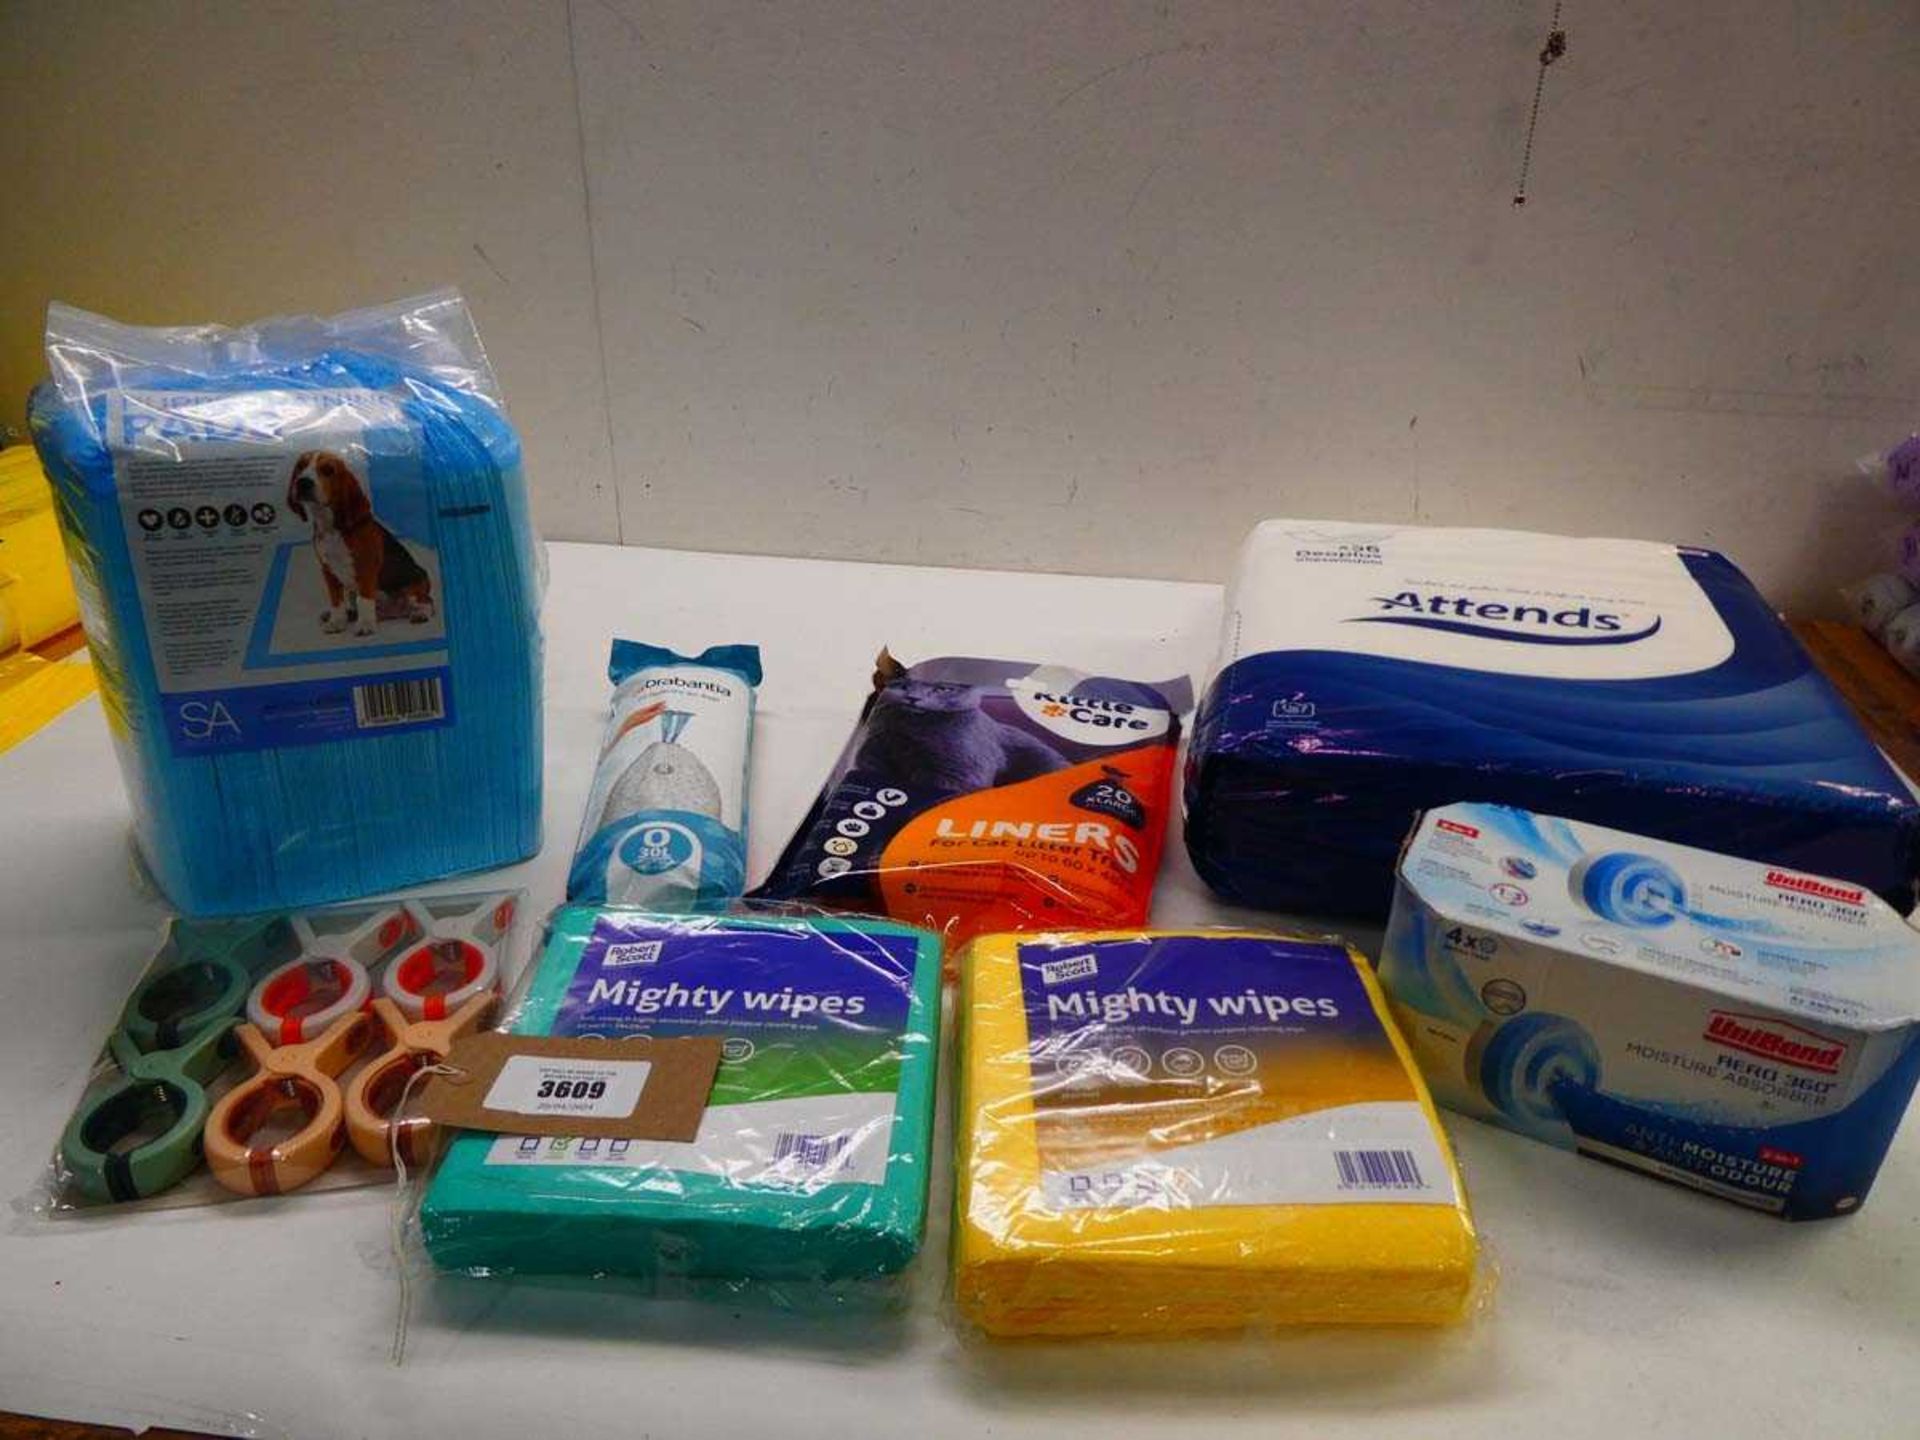 +VAT Unibond absorbers, puppy pads, mighty wipes, pegs, bin bag, attends and kitty liners